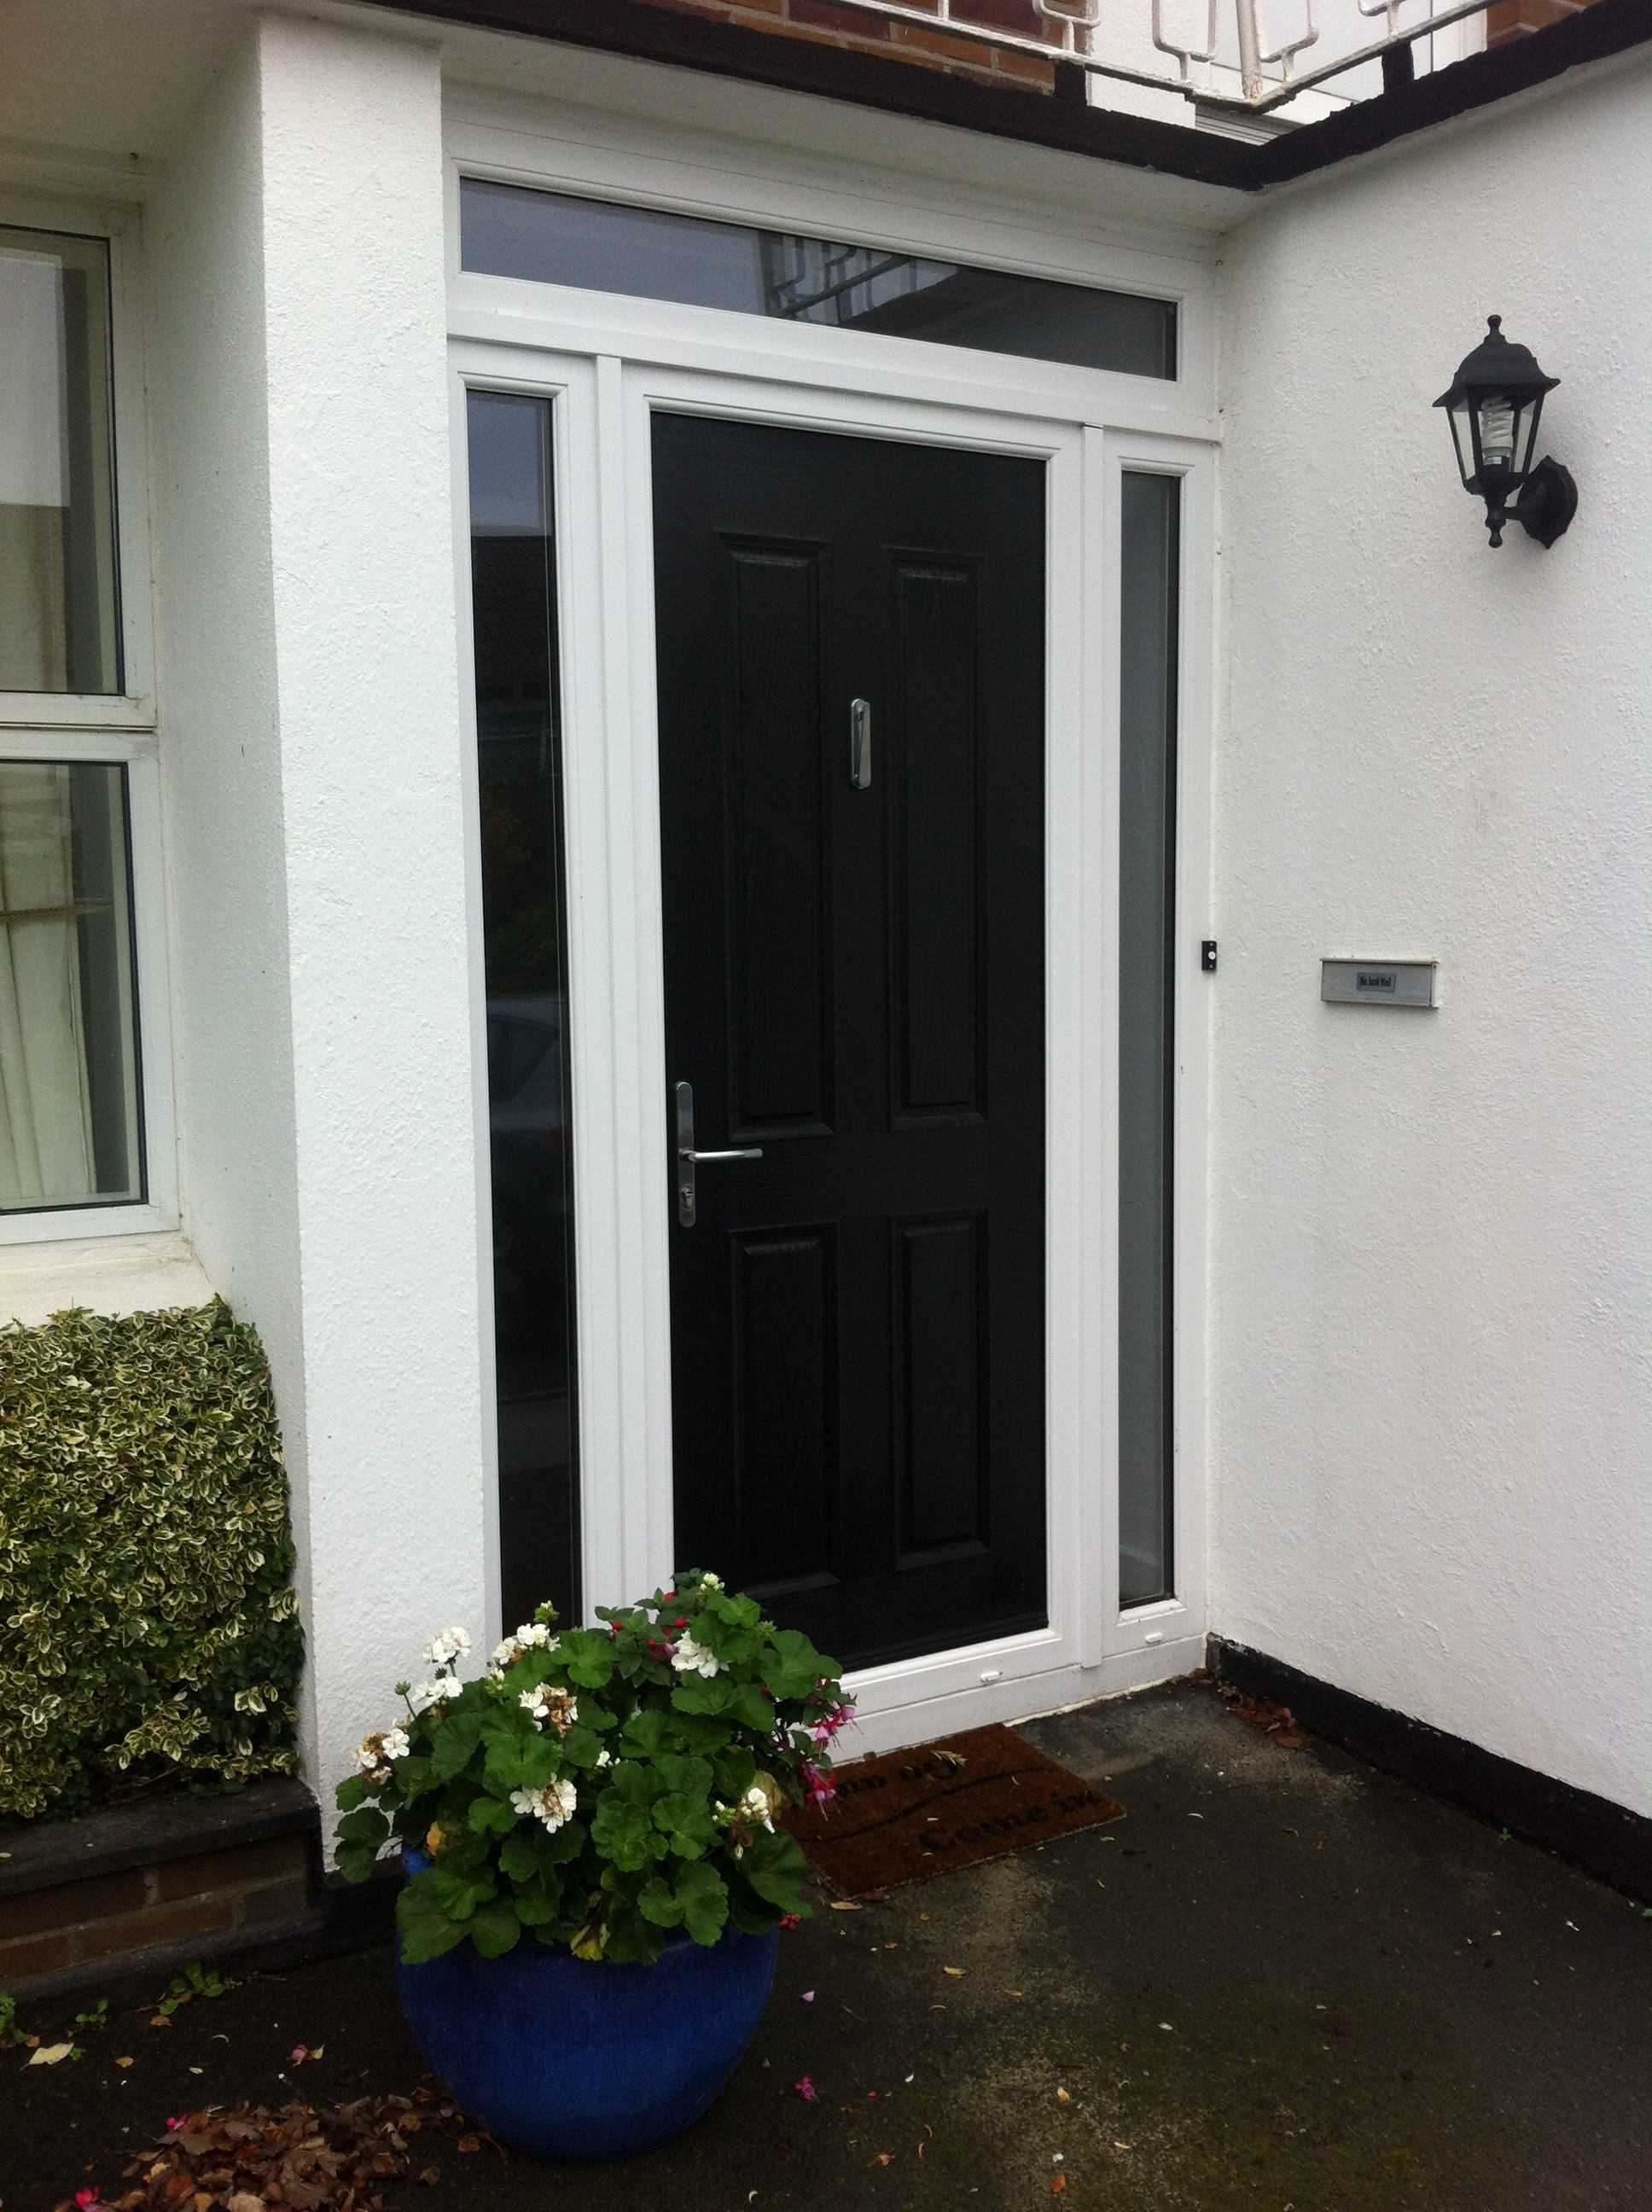 BLACK APEER APL1 COMPOSITE FRONT DOOR 
WITH WHITE FRAME FITTED BY ASGARD WINDOWS IN DUBLIN.